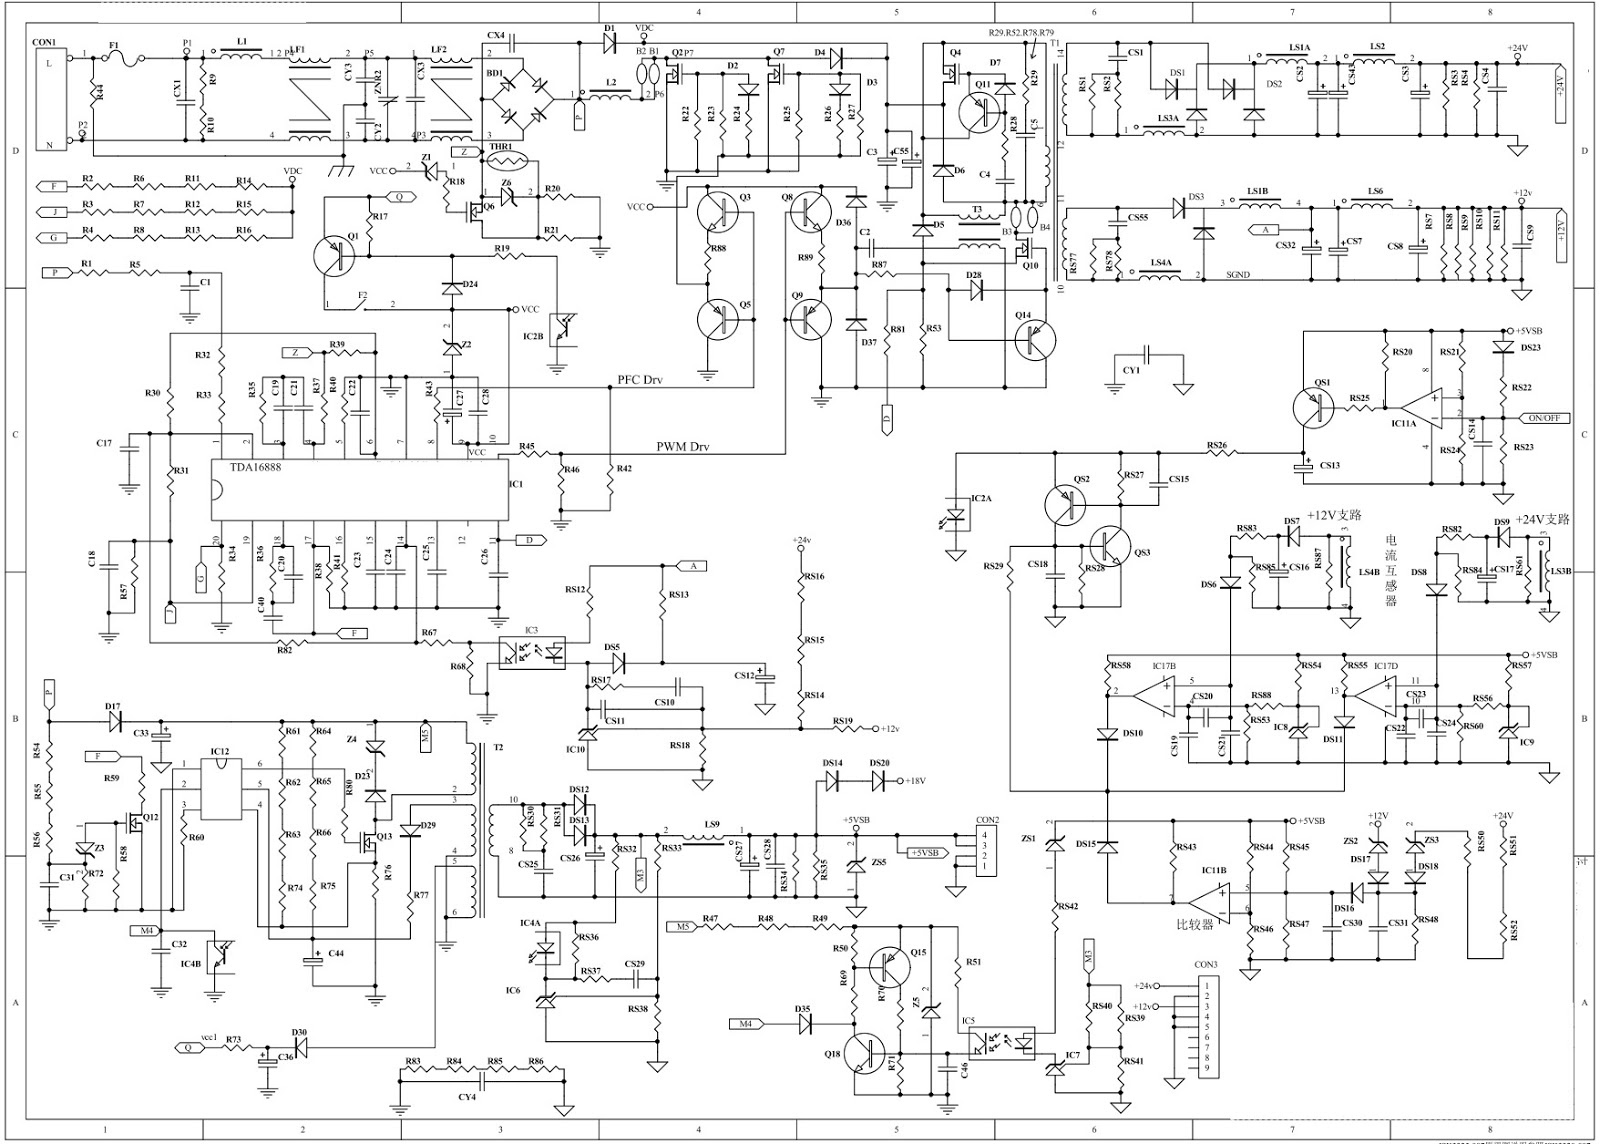 Schematic Diagrams: Mytek and TCL LCD TV – power supply circuit diagram